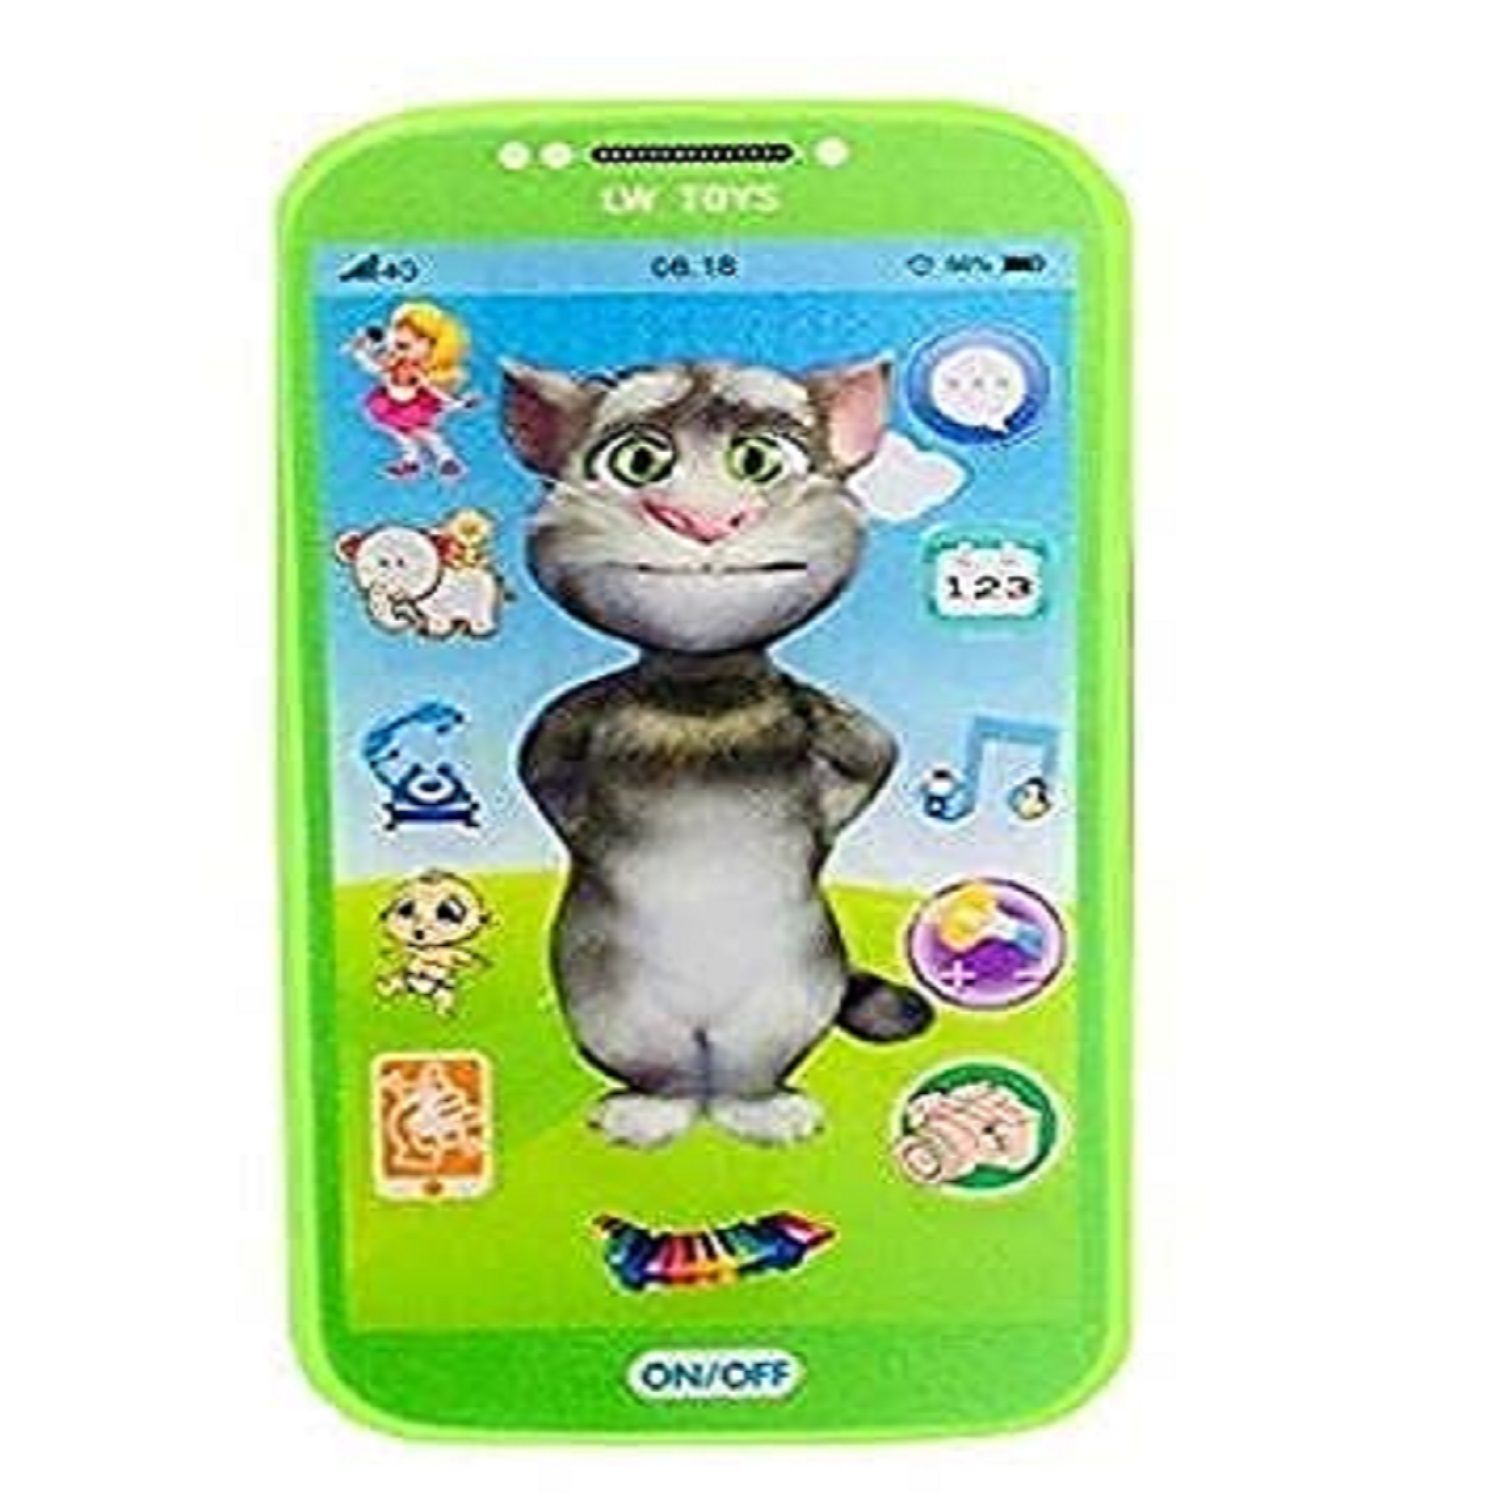     			My Talking First Learning Kids Mobile Smartphone with Touch Screen and Multiple Sound Effects